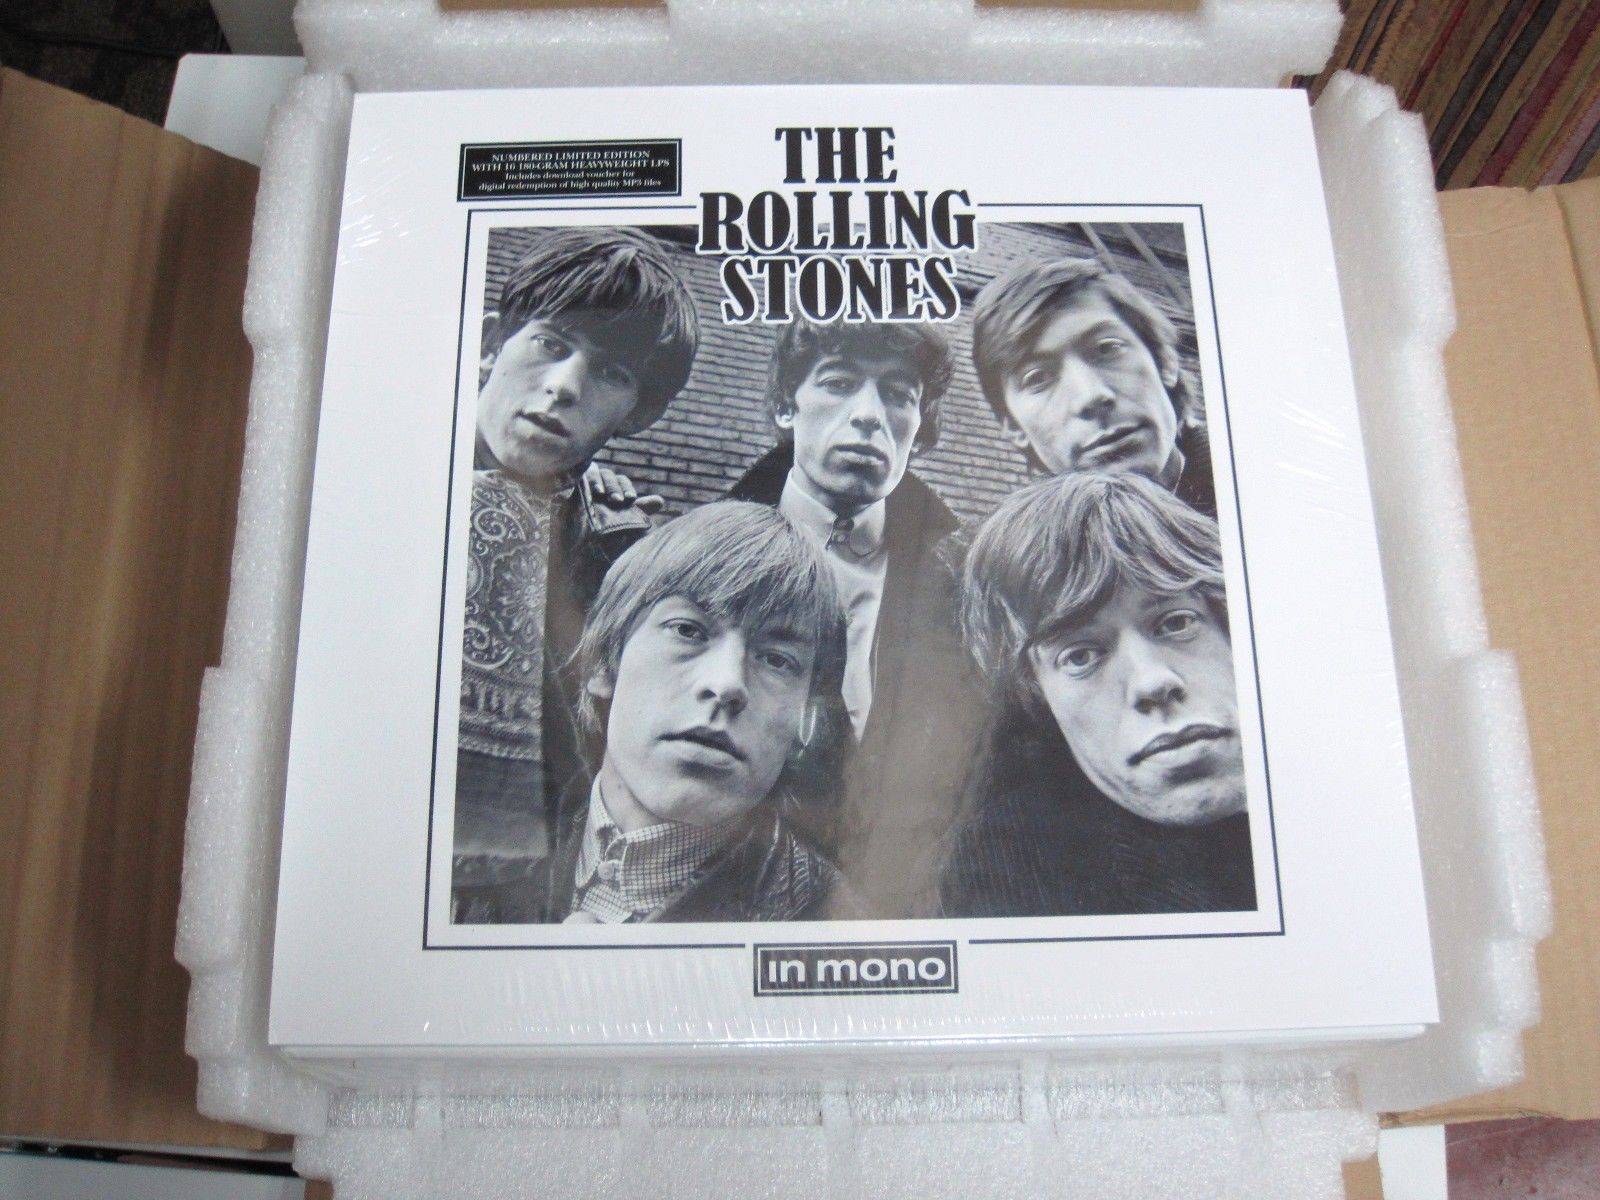 popsike.com - The Rolling Stones In Mono 16x LP box set sealed 180 gm vinyl  +download numbered - auction details